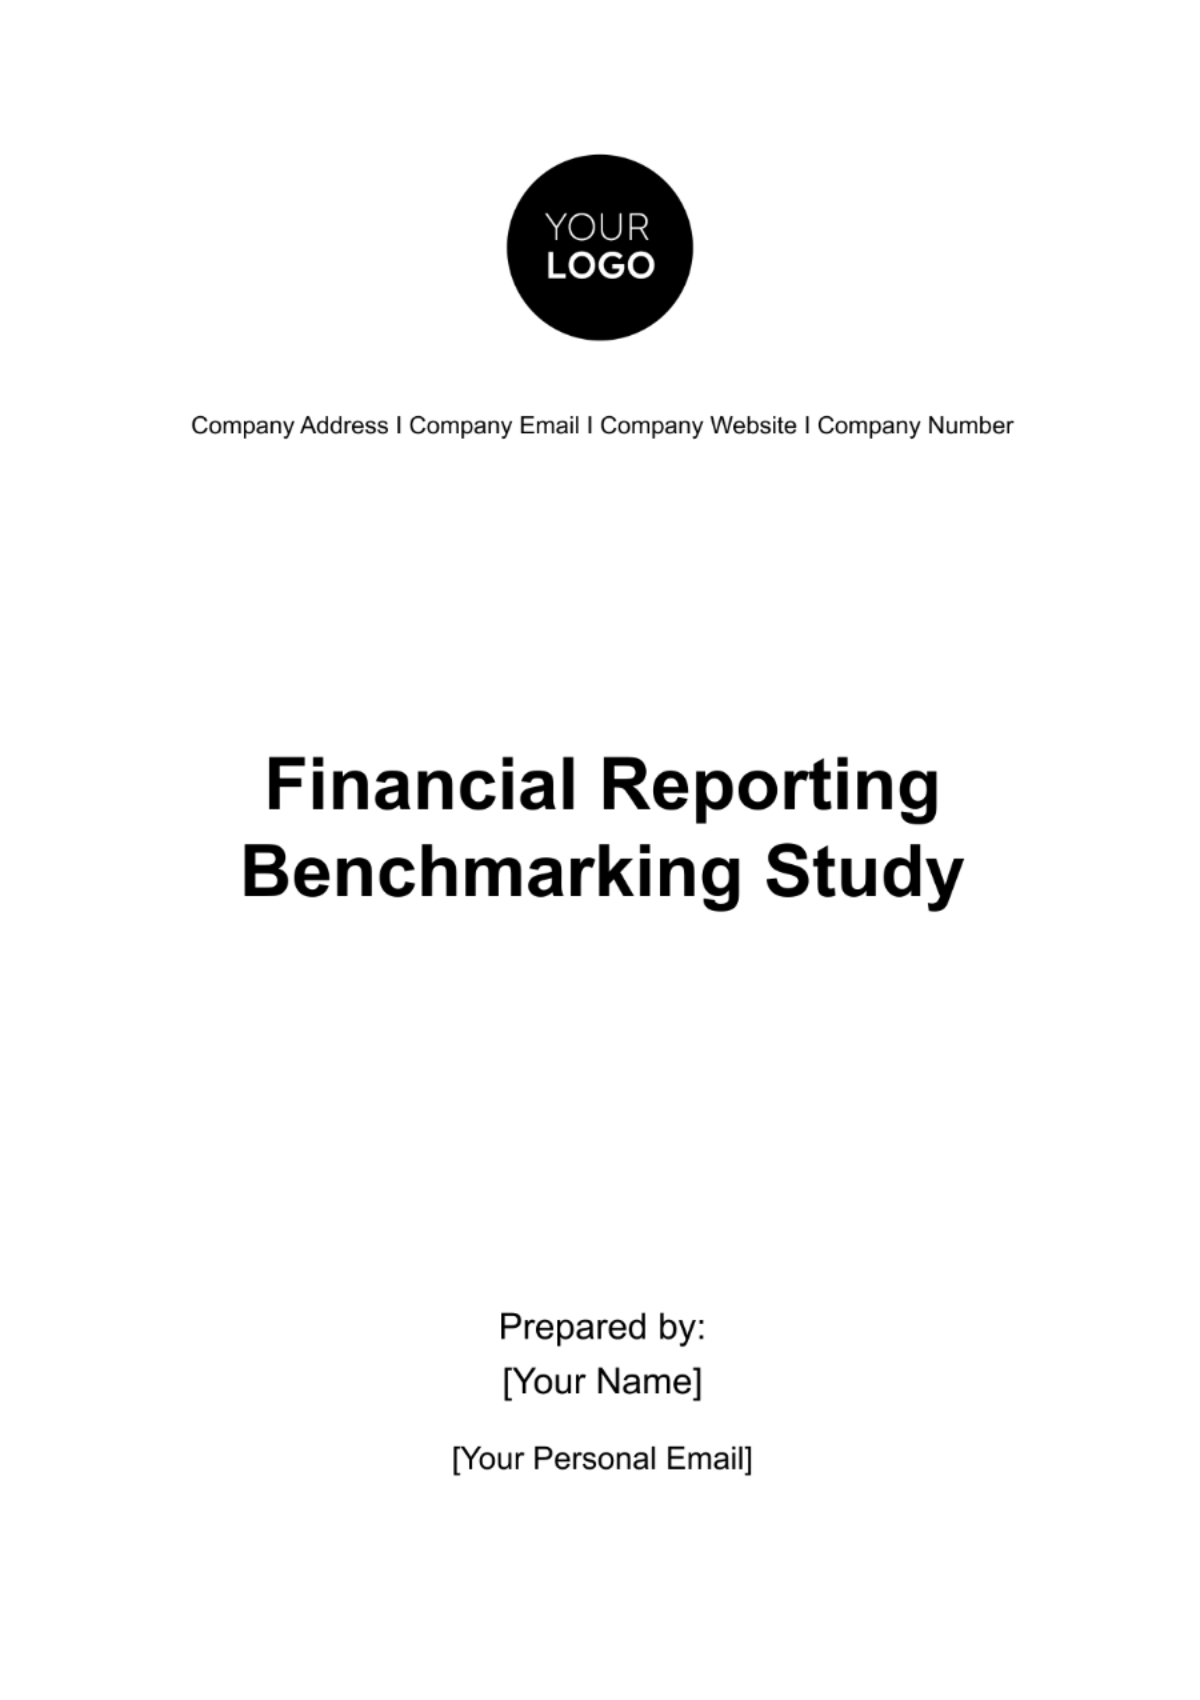 Free Financial Reporting Benchmarking Study Template